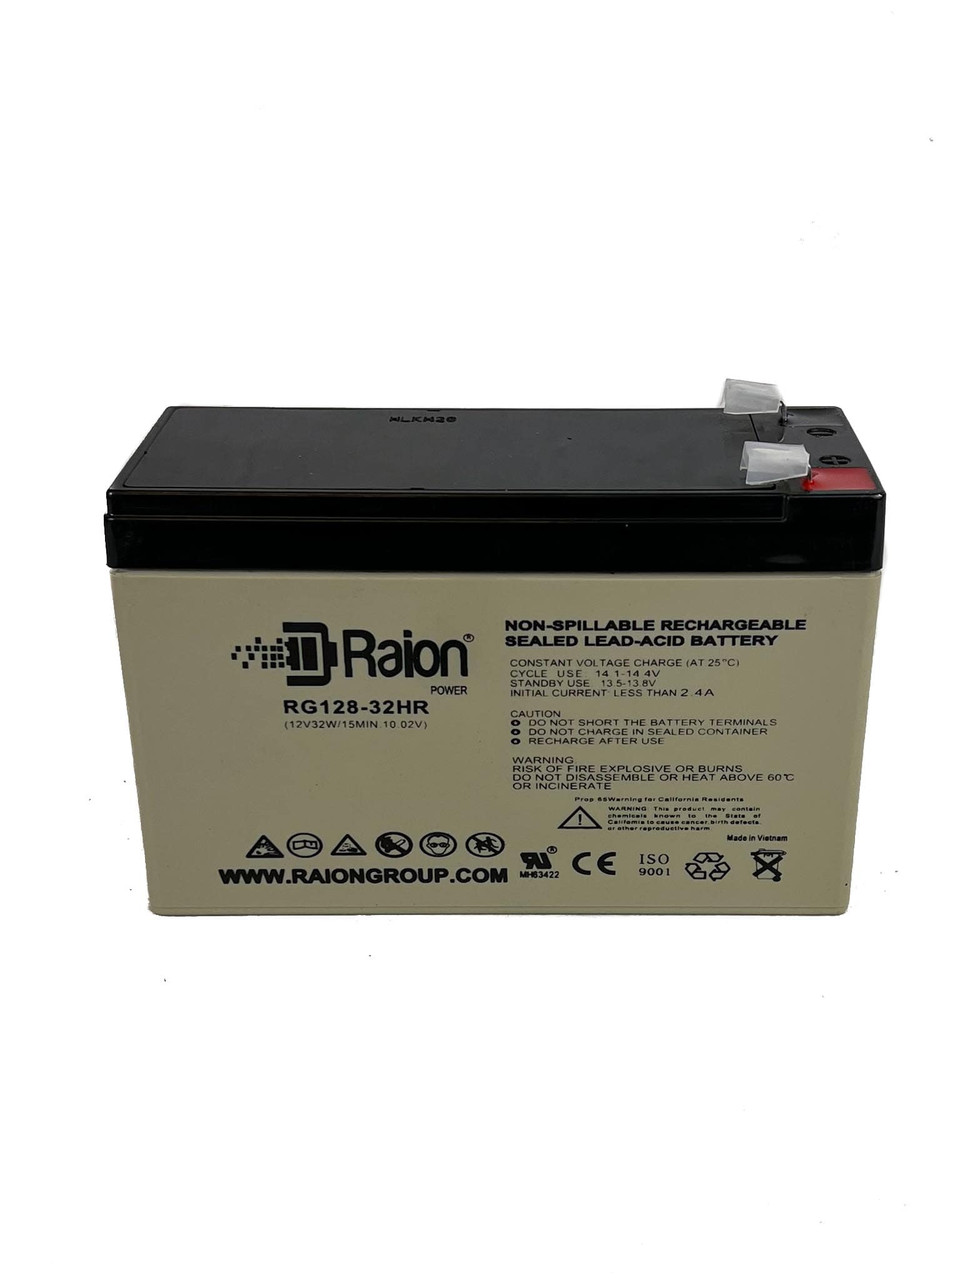 Raion Power RG128-32HR Replacement High Rate Battery Cartridge for APC SMART-UPS SUVS420